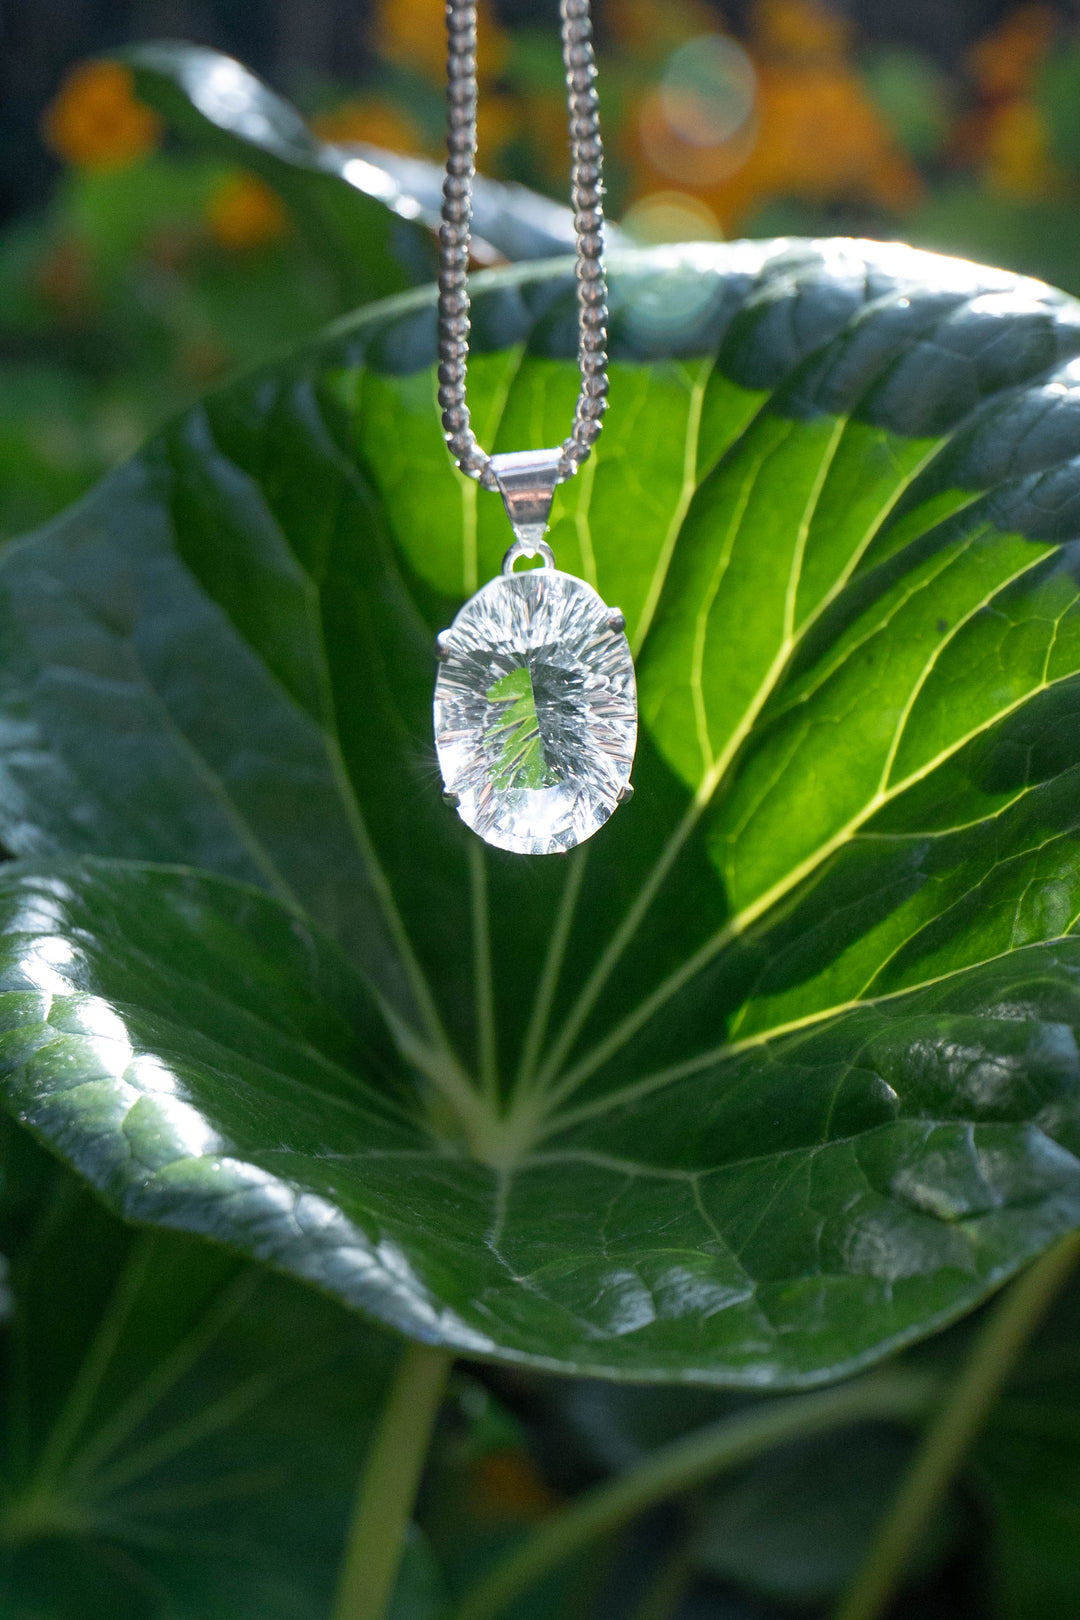 Stunning Faceted Crystal Quartz Pendant in Unique Sterling Silver Setting - Gemstone Pendant - Clear Crystal Quartz